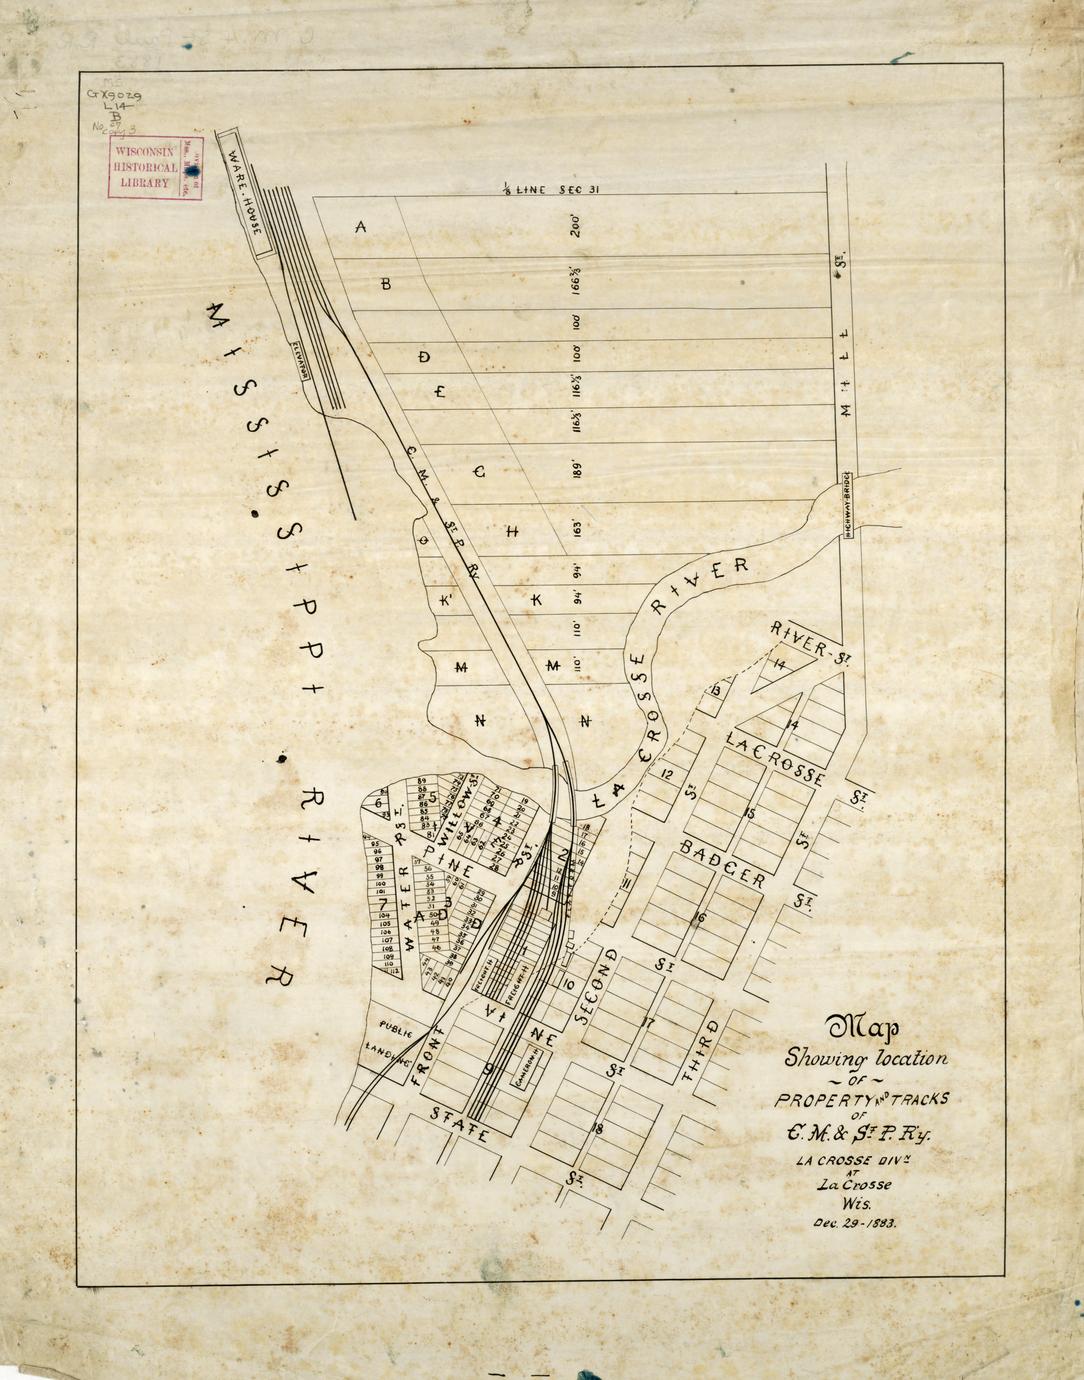 Map showing location of property and tracks of the Chicago, Milwaukee & St. Paul Railroad